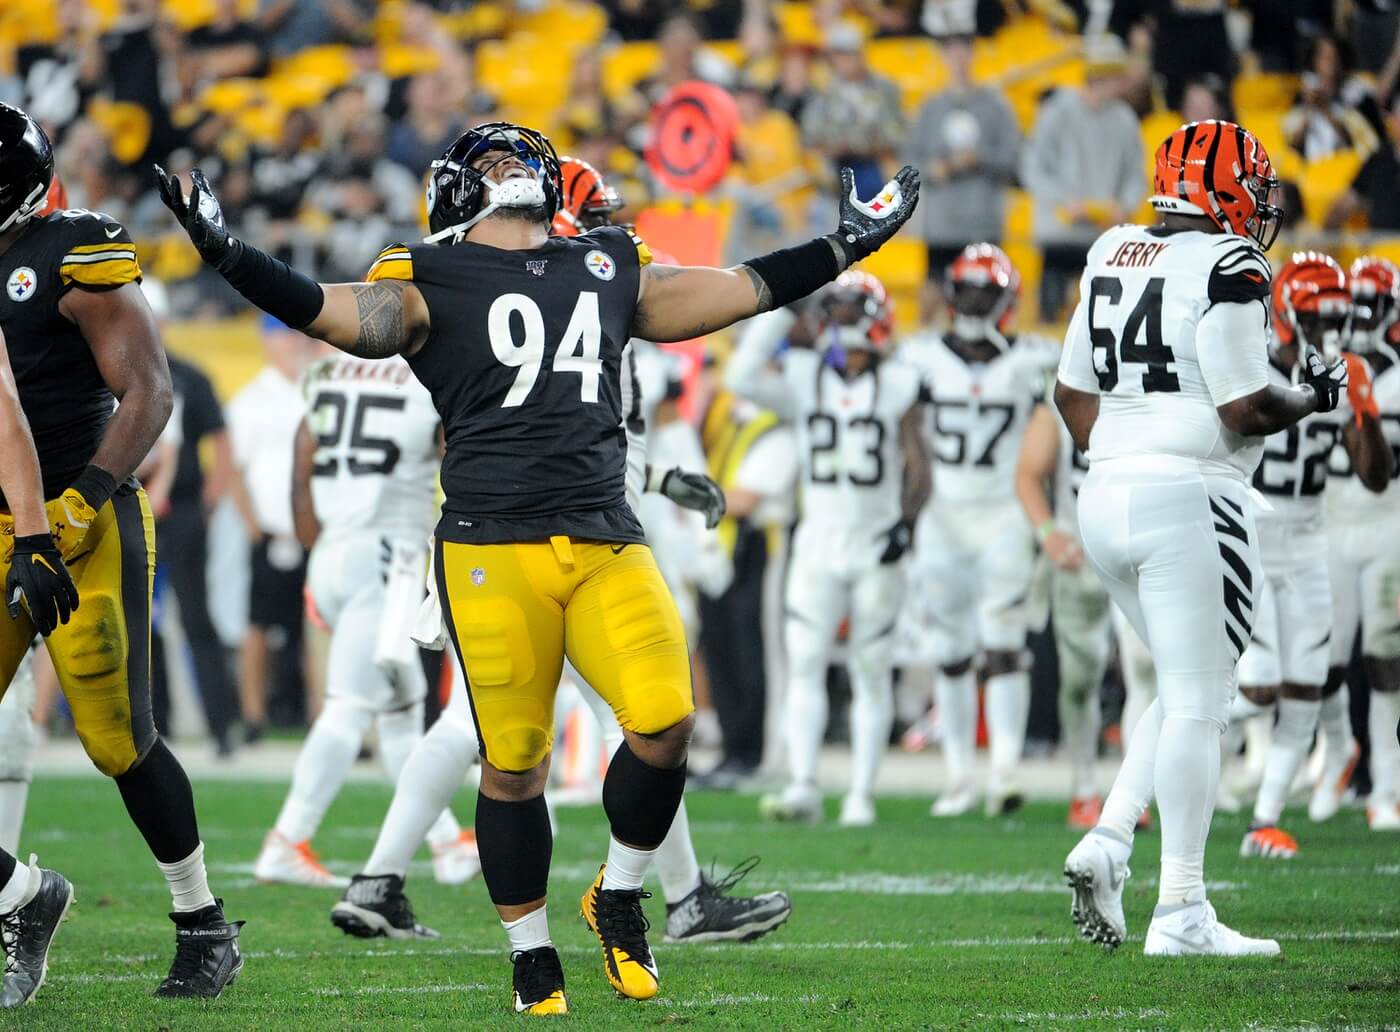 Pittsburgh Steelers defensive end Tyson Alualu (94) celebrates a sack against the Cincinnati Bengals during the fourth quarter at Heinz Field. The Steelers won 27-3.